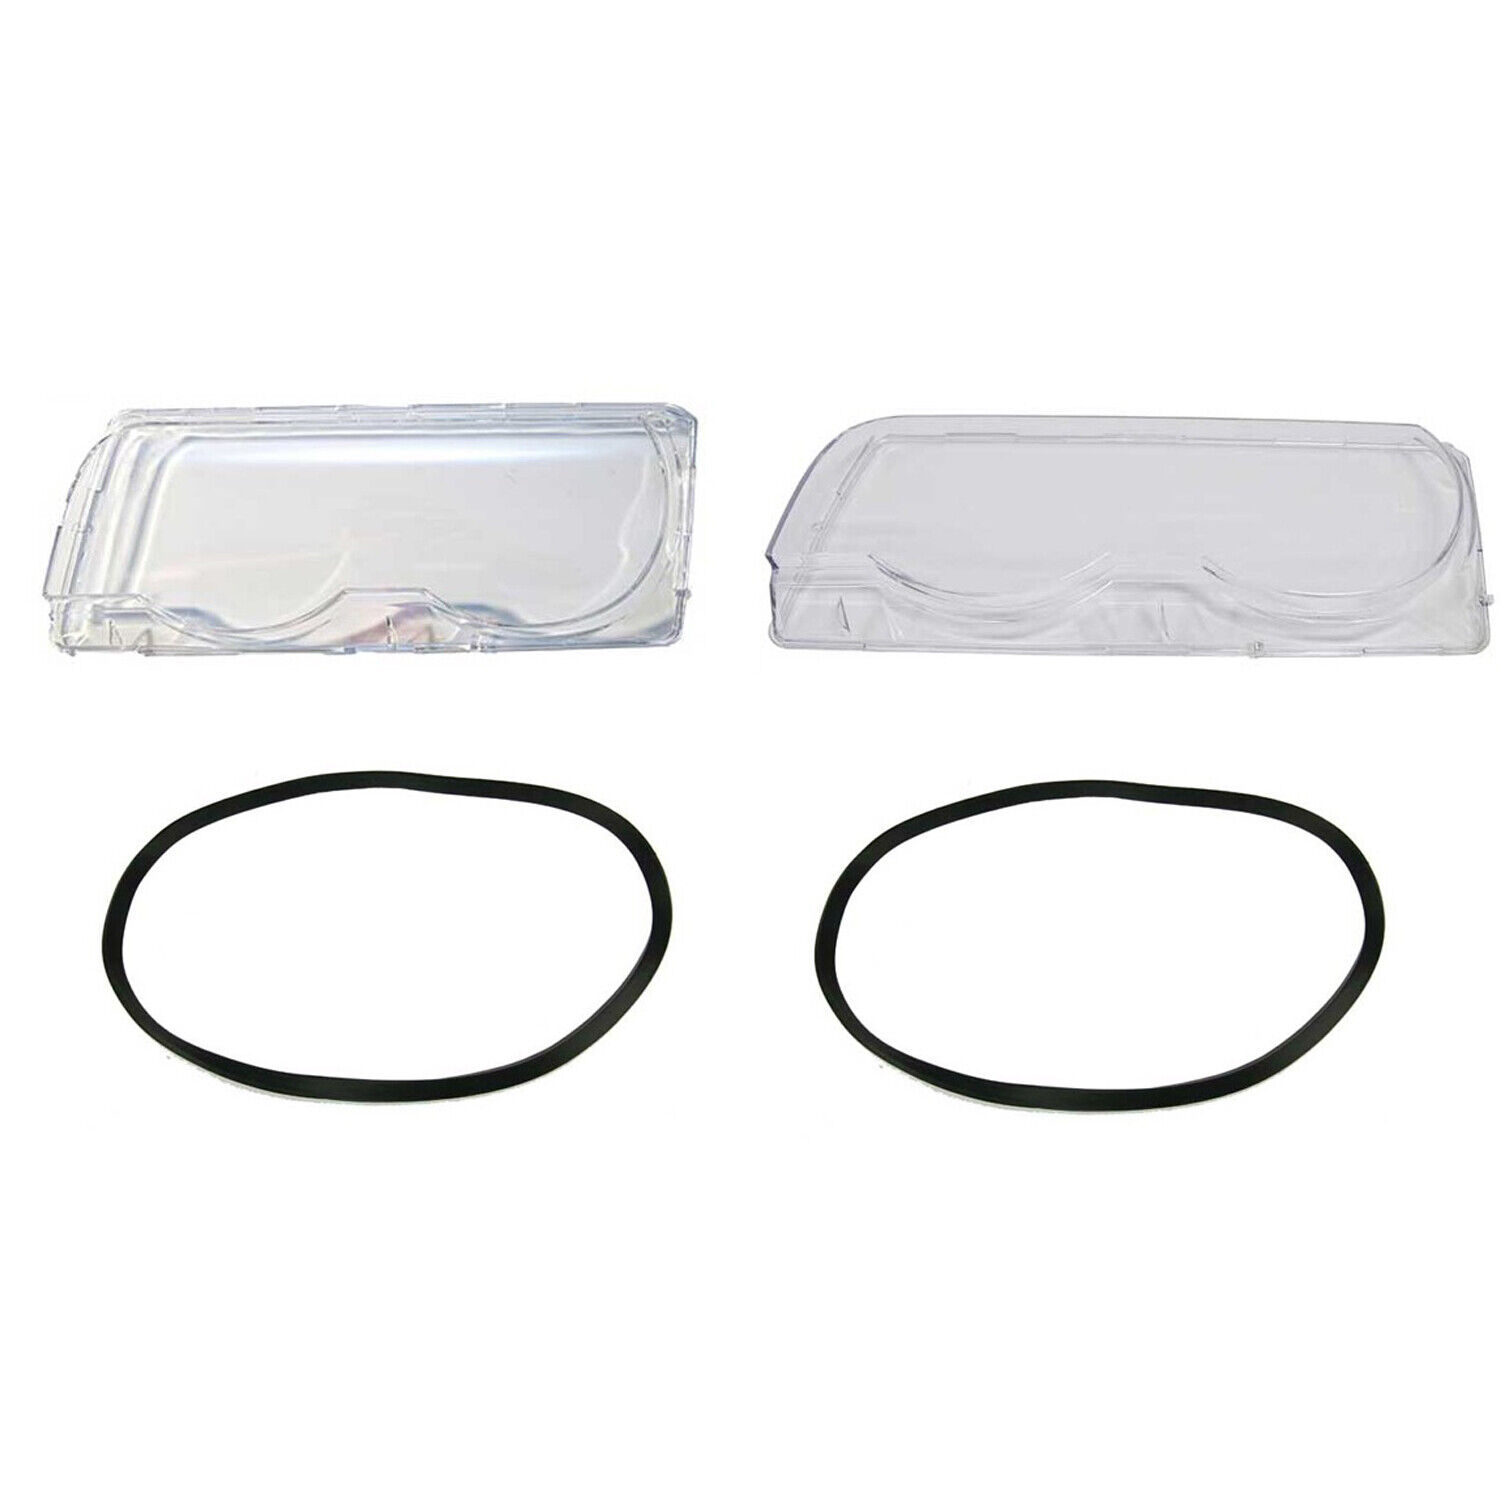 OEM Headlight Lens with Gasket Kit For BMW E38 740i 740iL 750iL Base